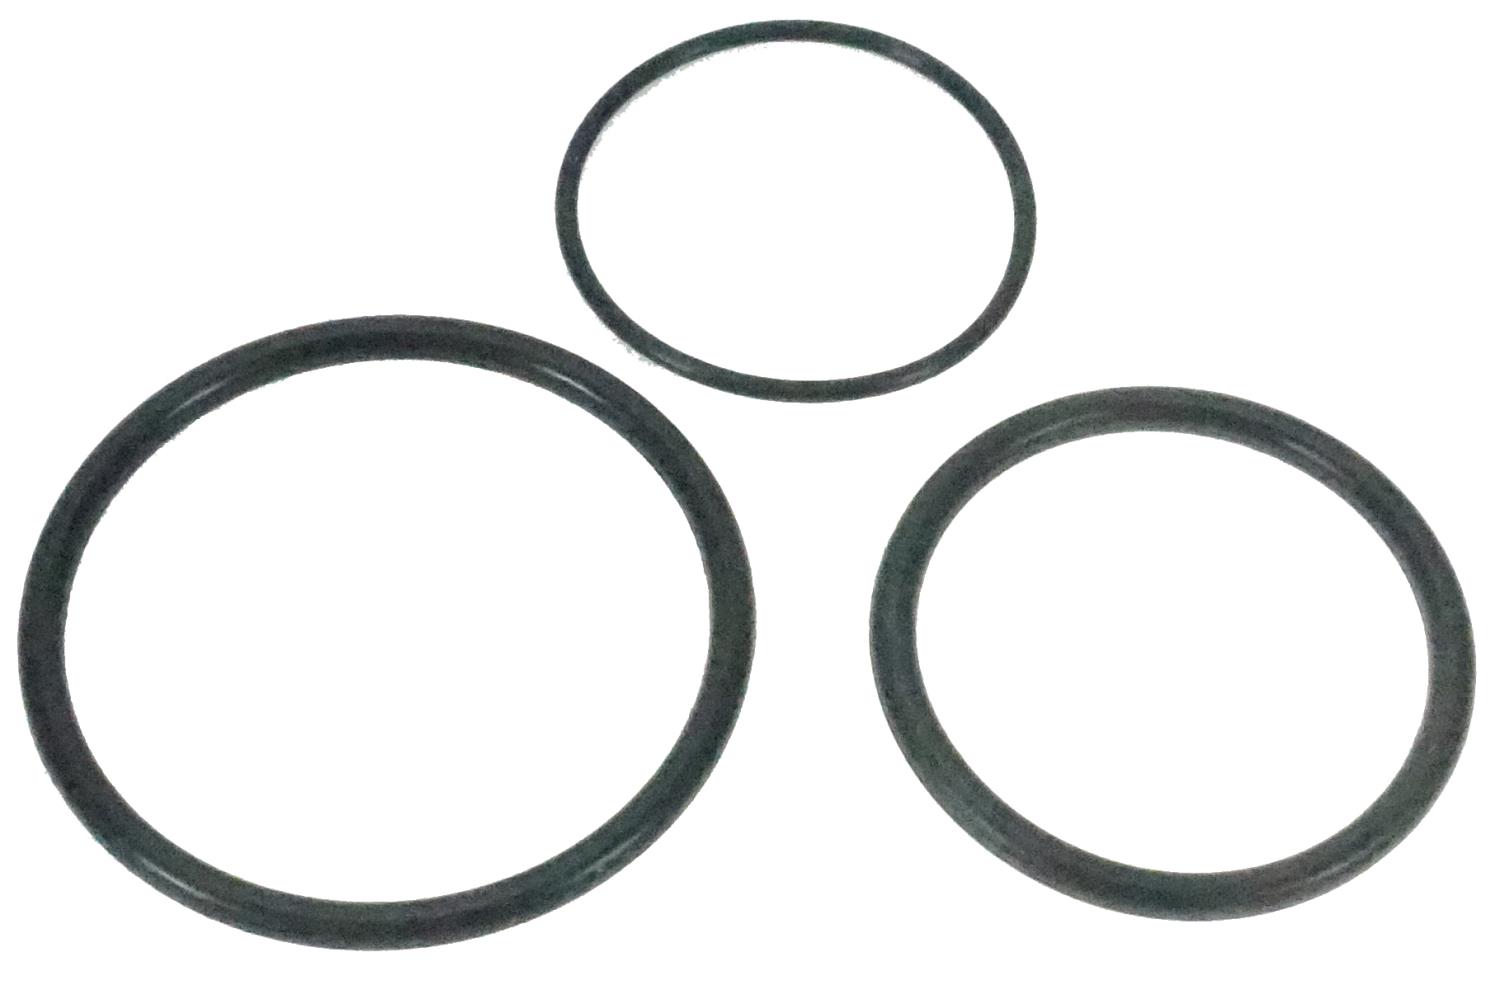 Replacement O-Ring Set Fits All HD Hydraulic Bearings